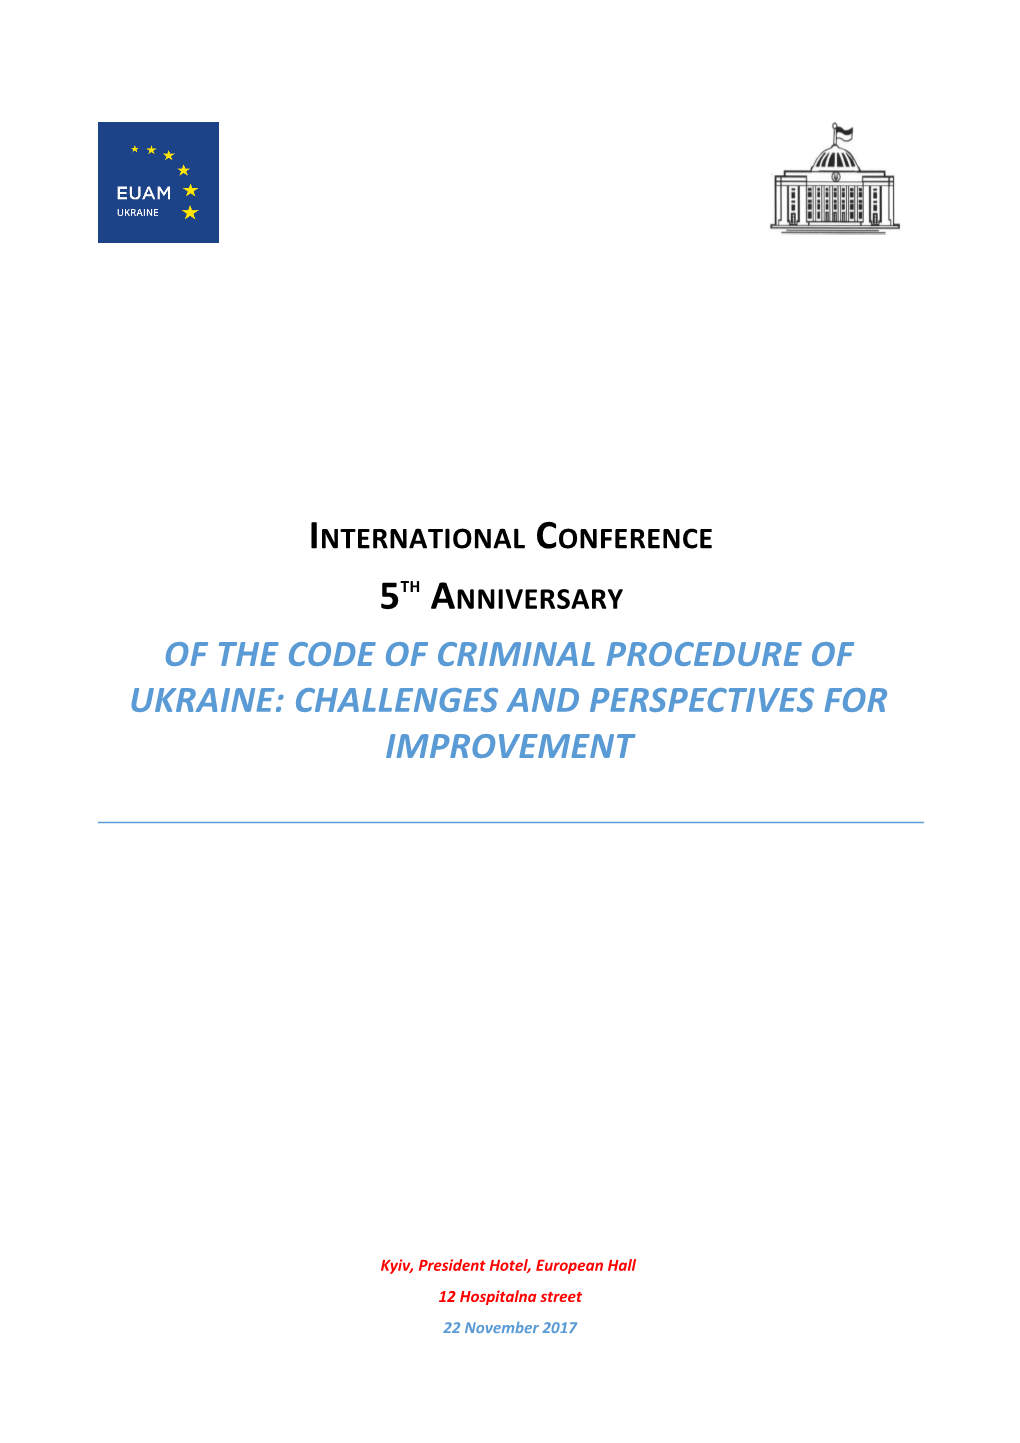 Ofthe Code of Criminal Procedure of Ukraine: Challenges and Perspectives for Improvement